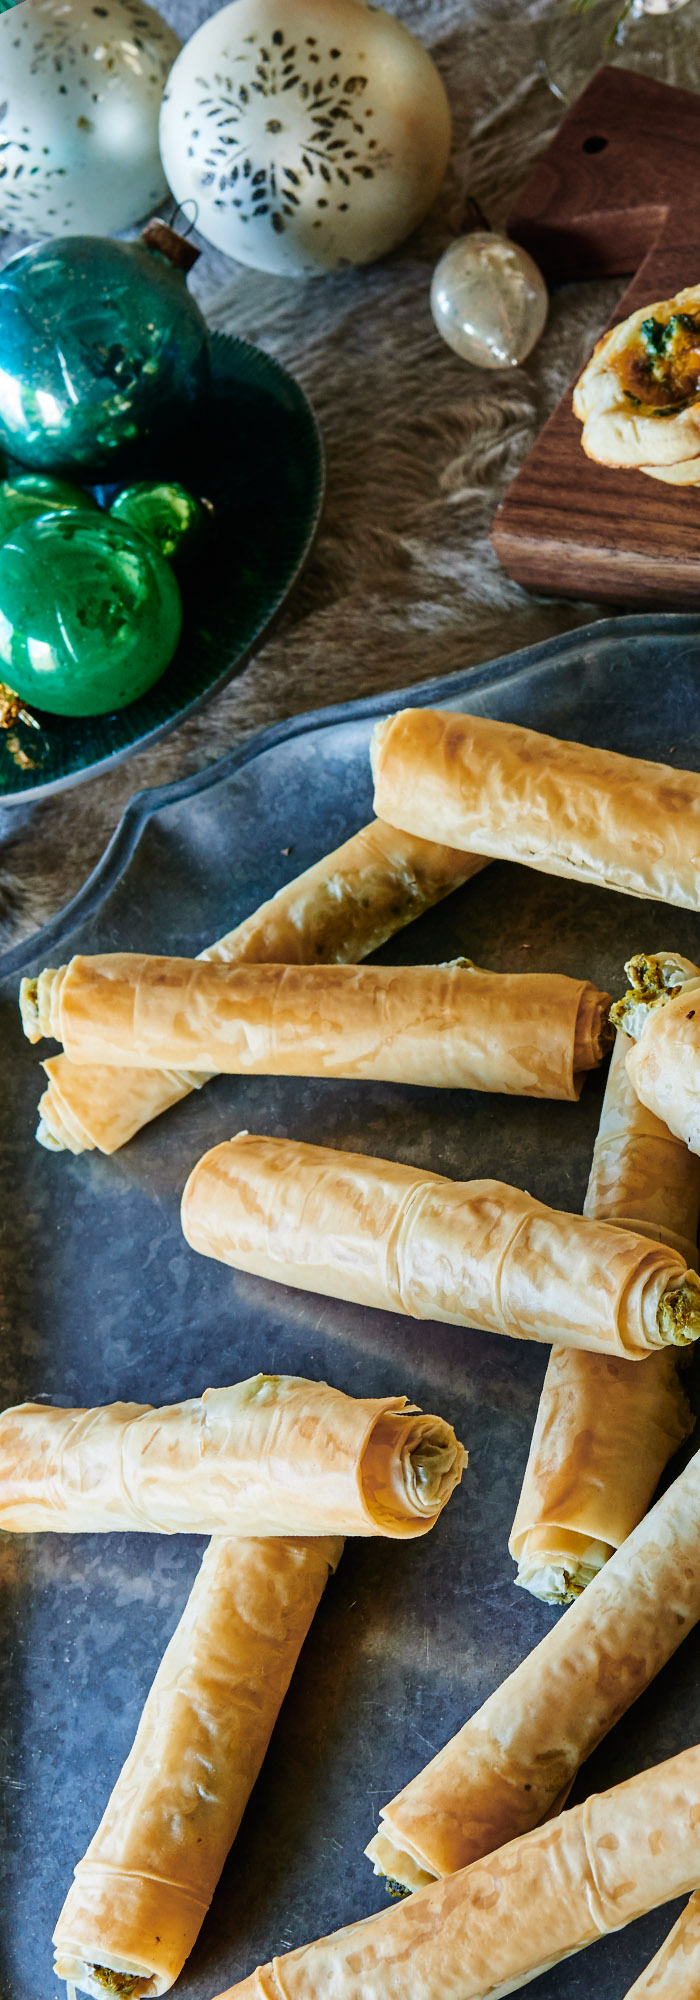 ab_link_pinterest_goat_cheese_cigars